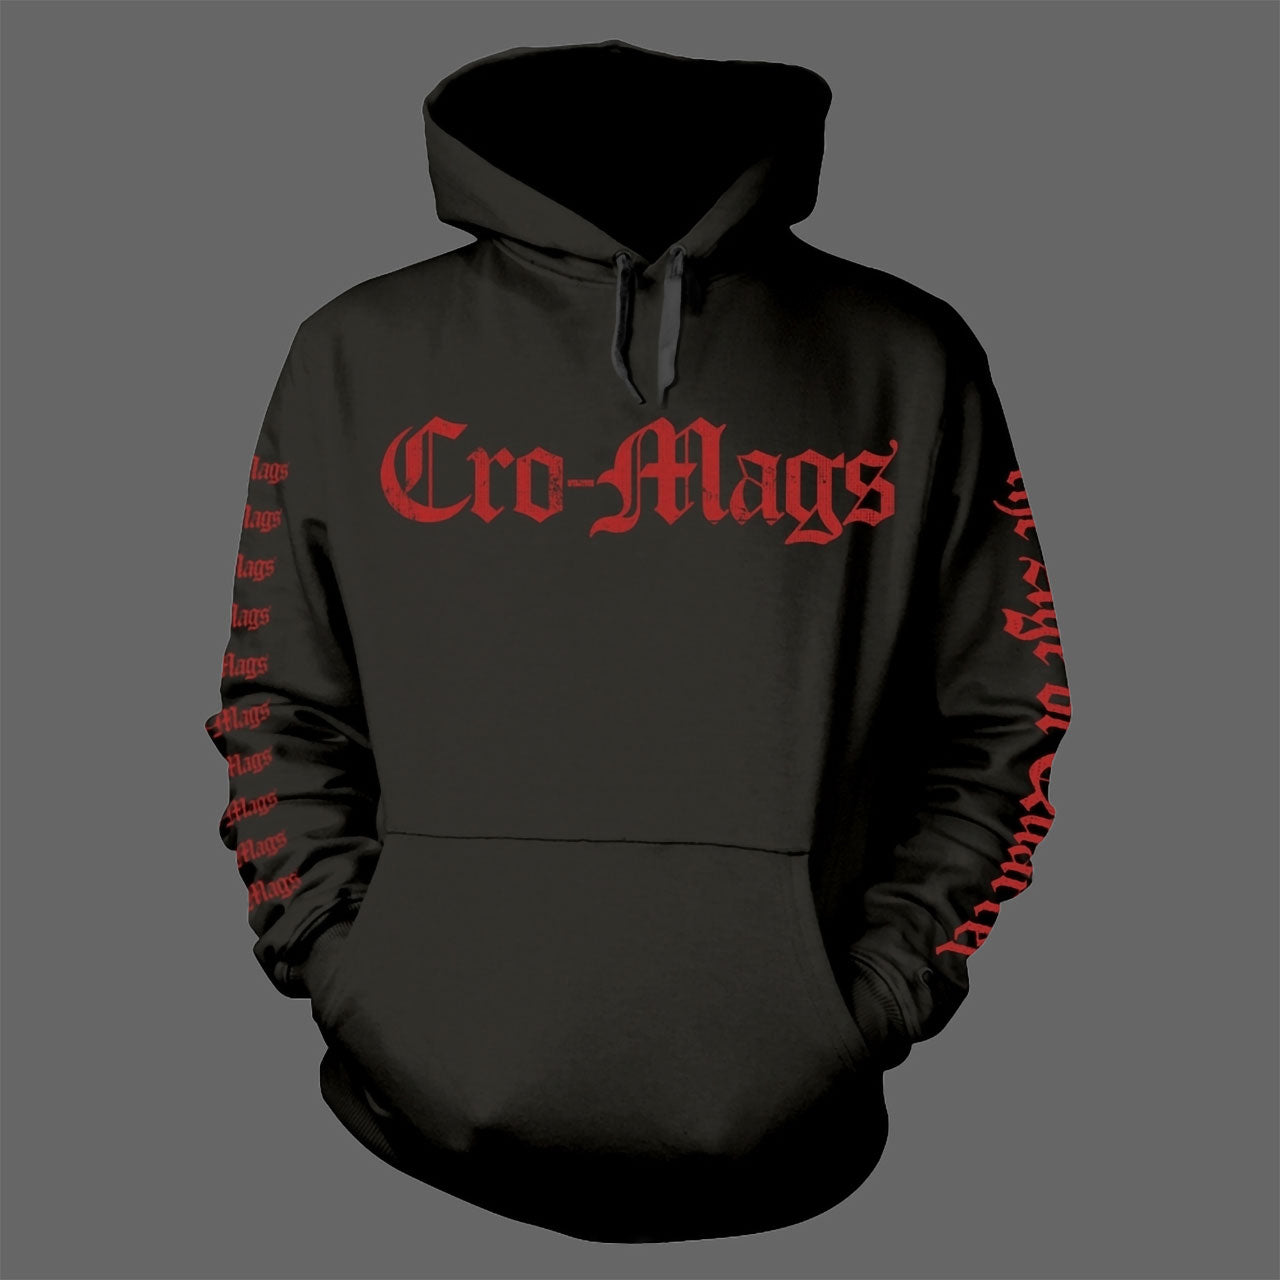 Cro-Mags - The Age of Quarrel (Hoodie)